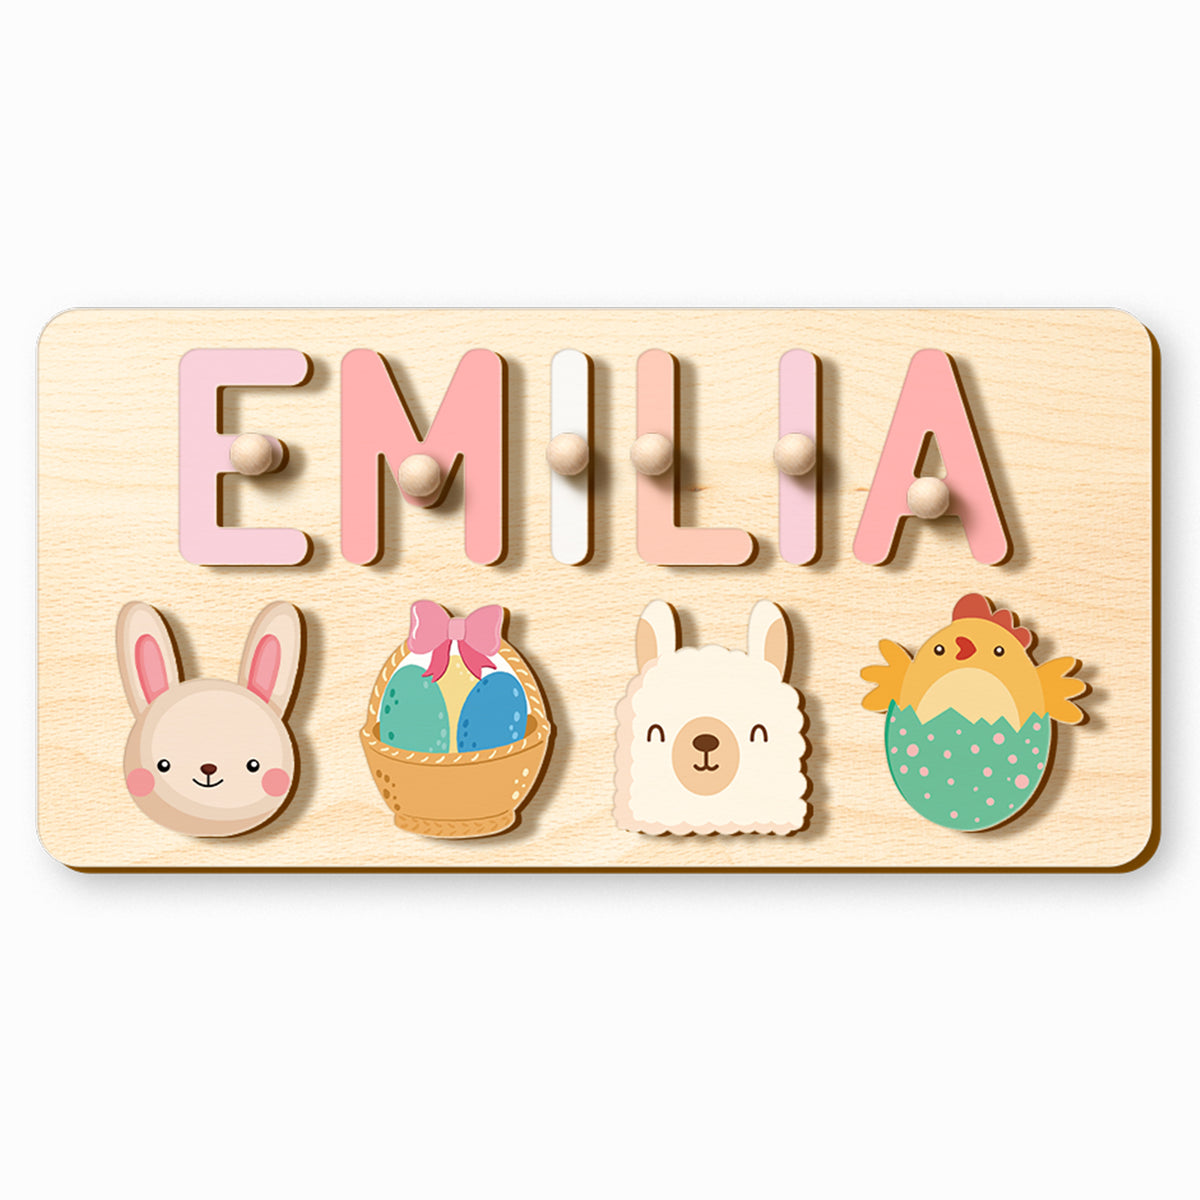 Customizedbee Personalized Name Puzzle,2 line,Wooden Puzzles for Toddlers 1-3, Easter Gifts for Toddlers